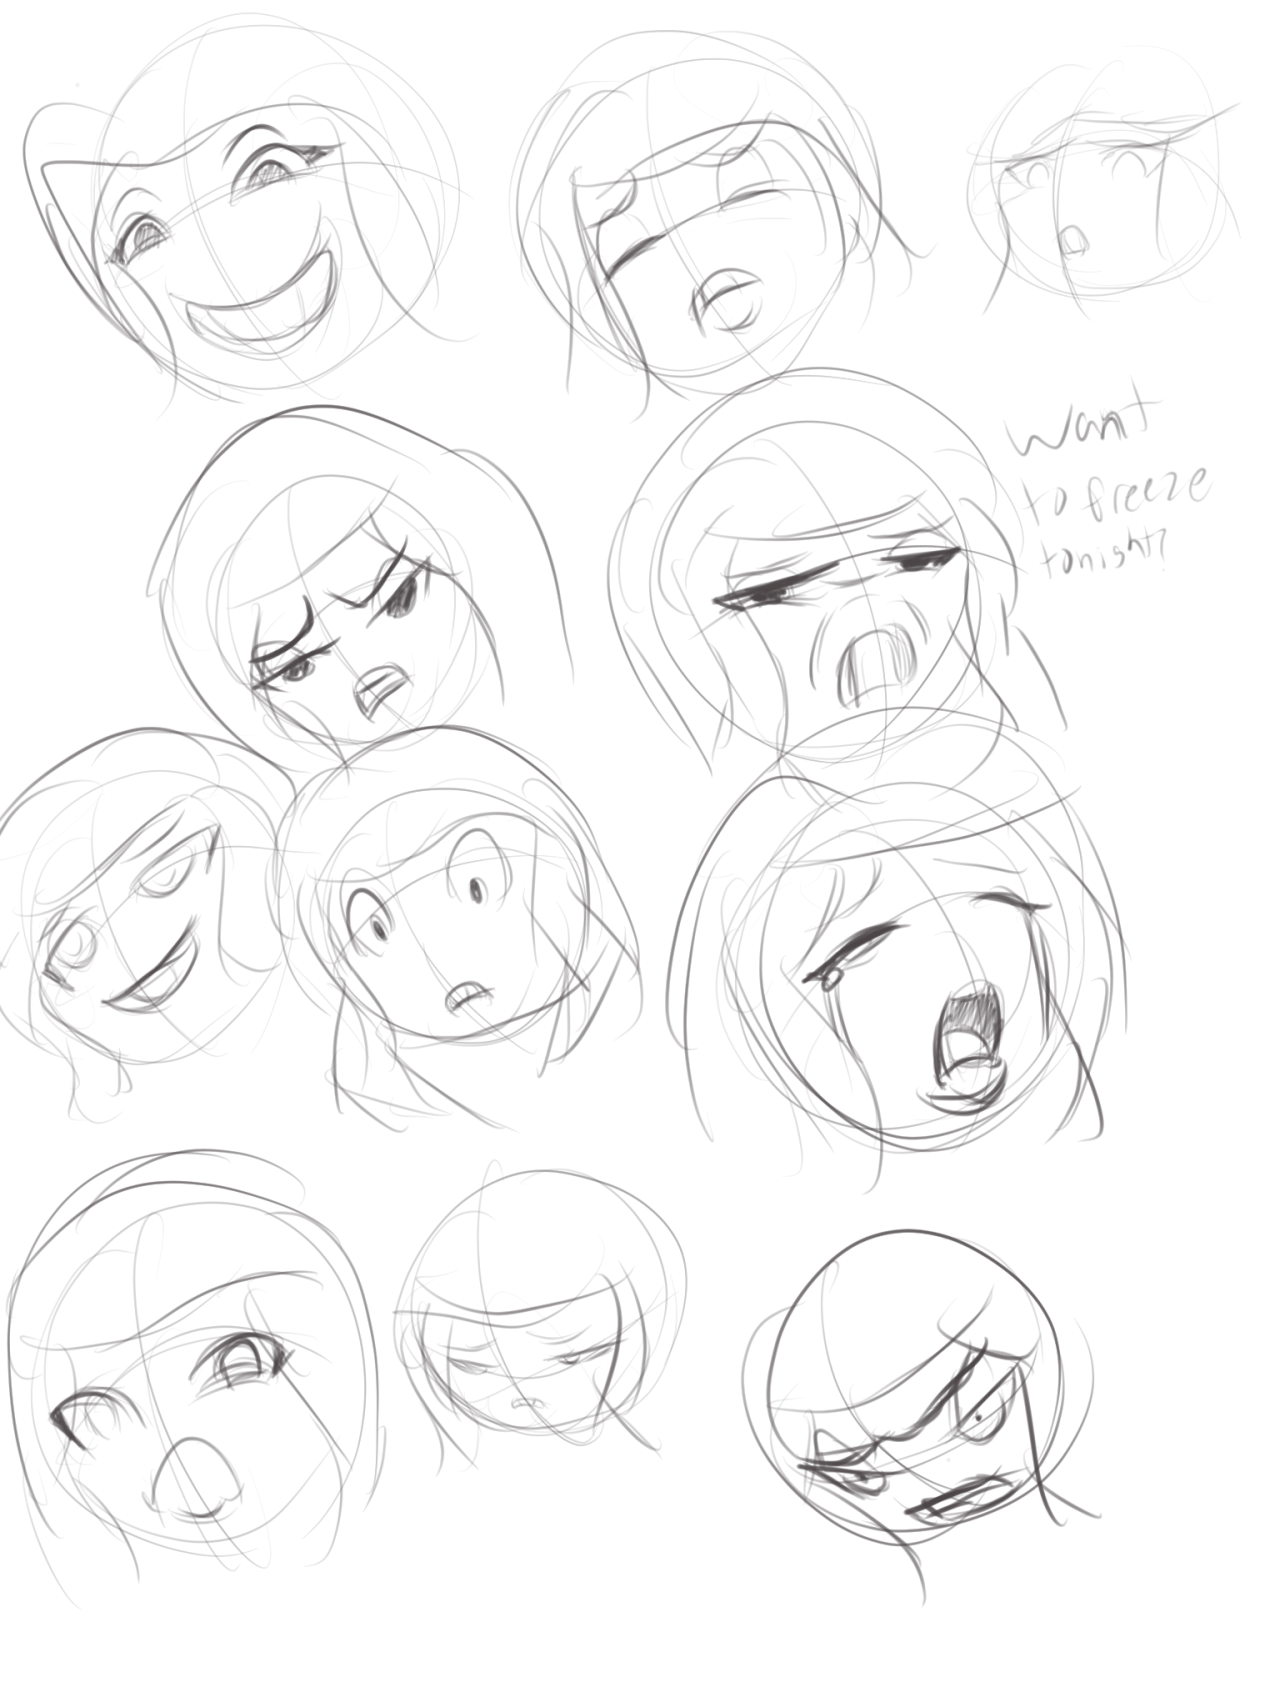 Wouldn’t call these inktoeber drawings, as they are expression sketches of Aislin,